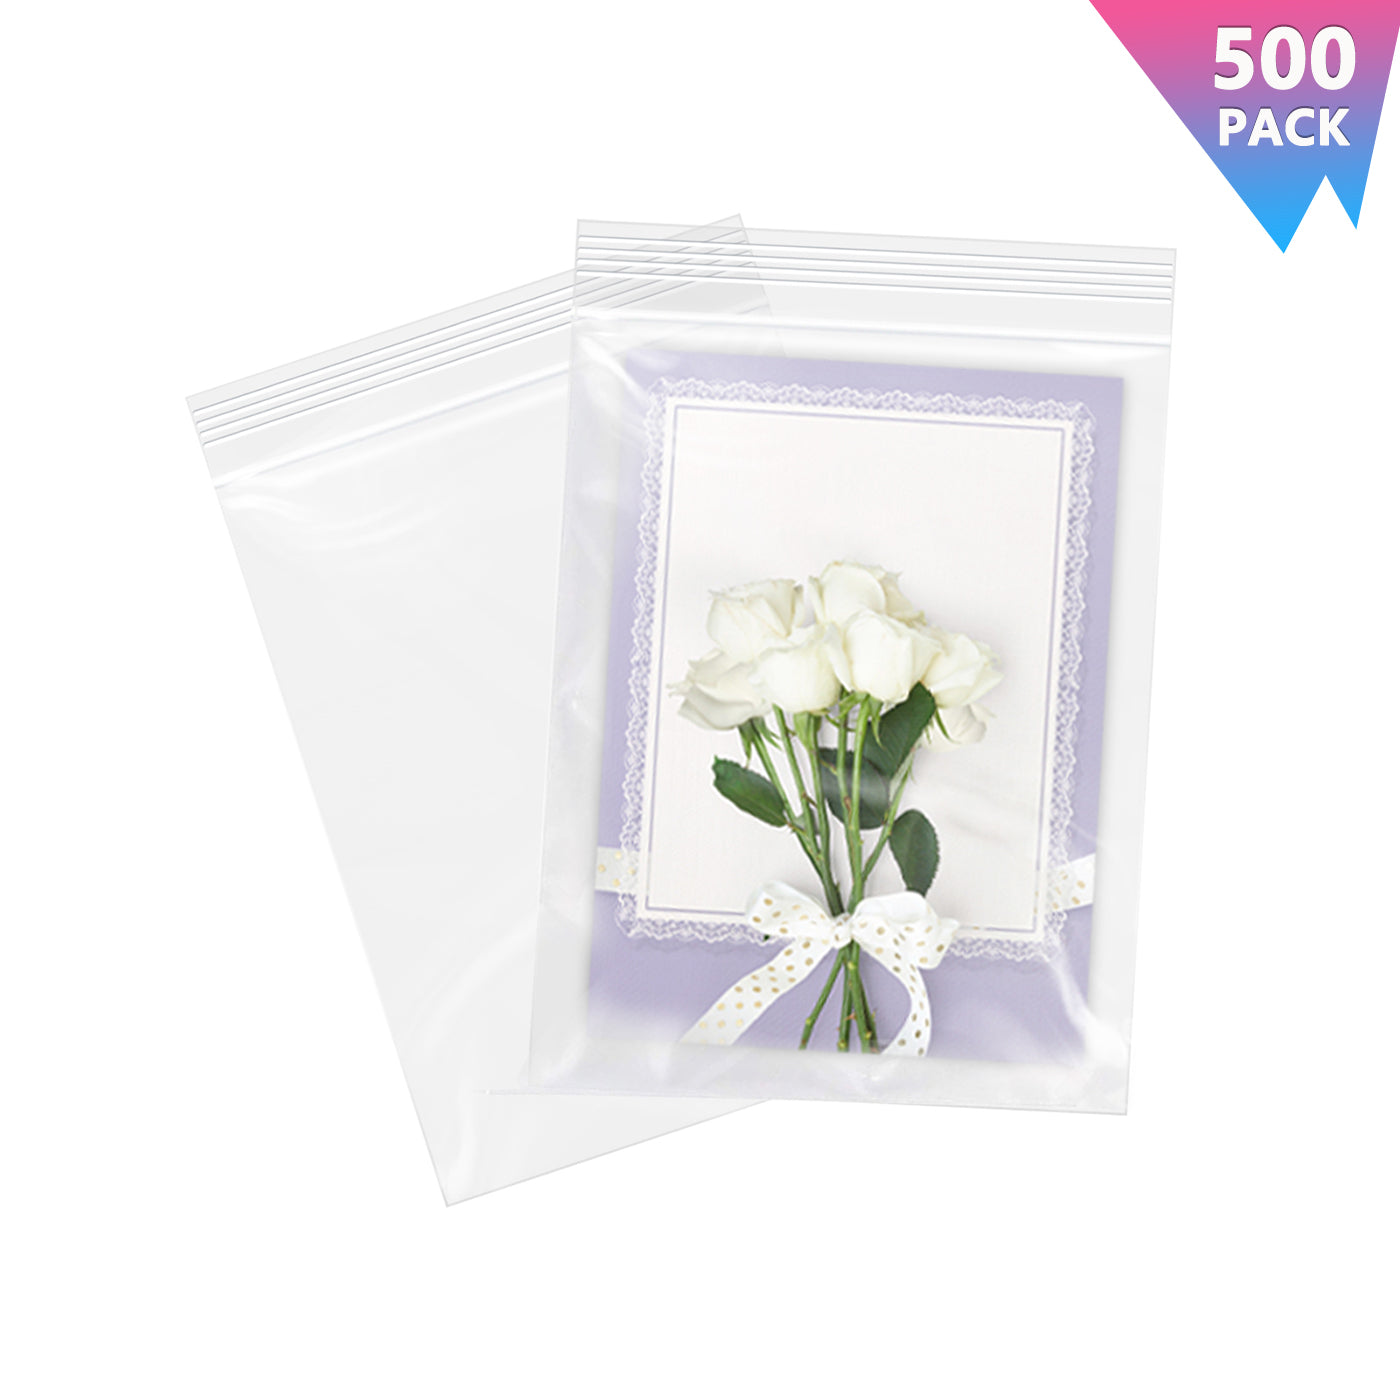 Pack of 100 Large Ziplock Bags 13 x 15 - 2 Mil - Plastic Bags with